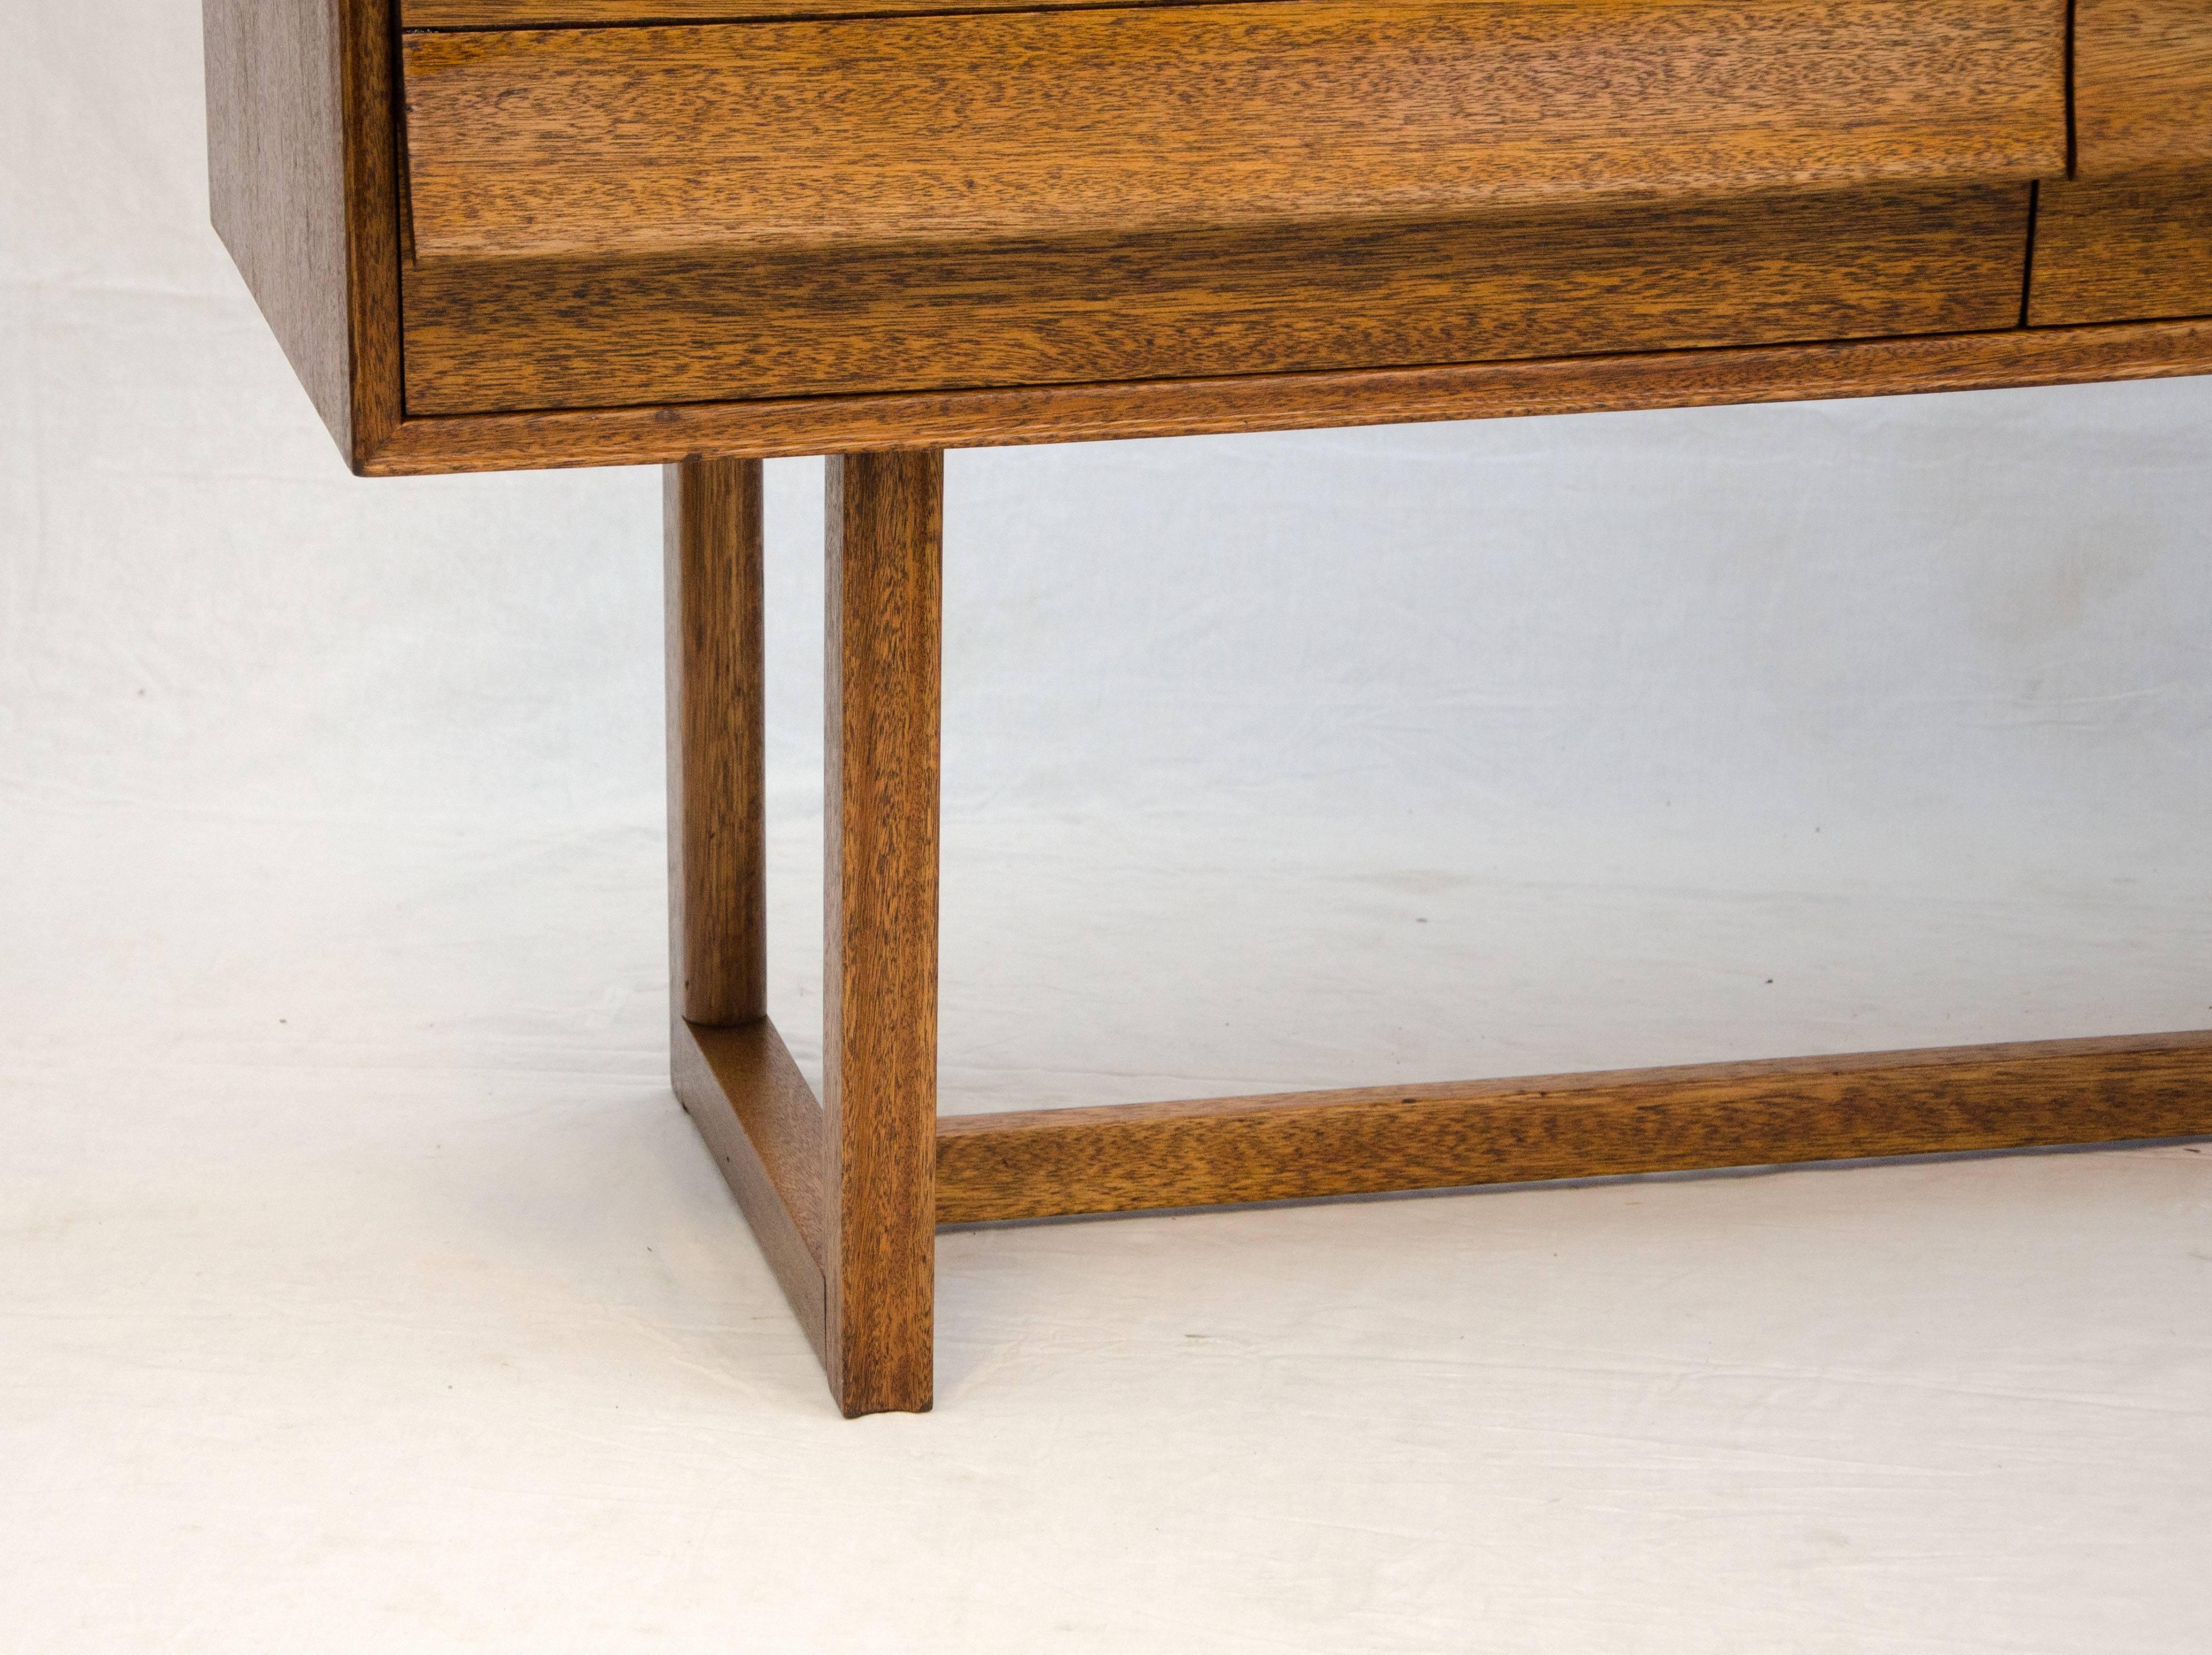 Mahogany Console Buffet Table with Drawers. Paul Laszlo for Brown & Saltman of California